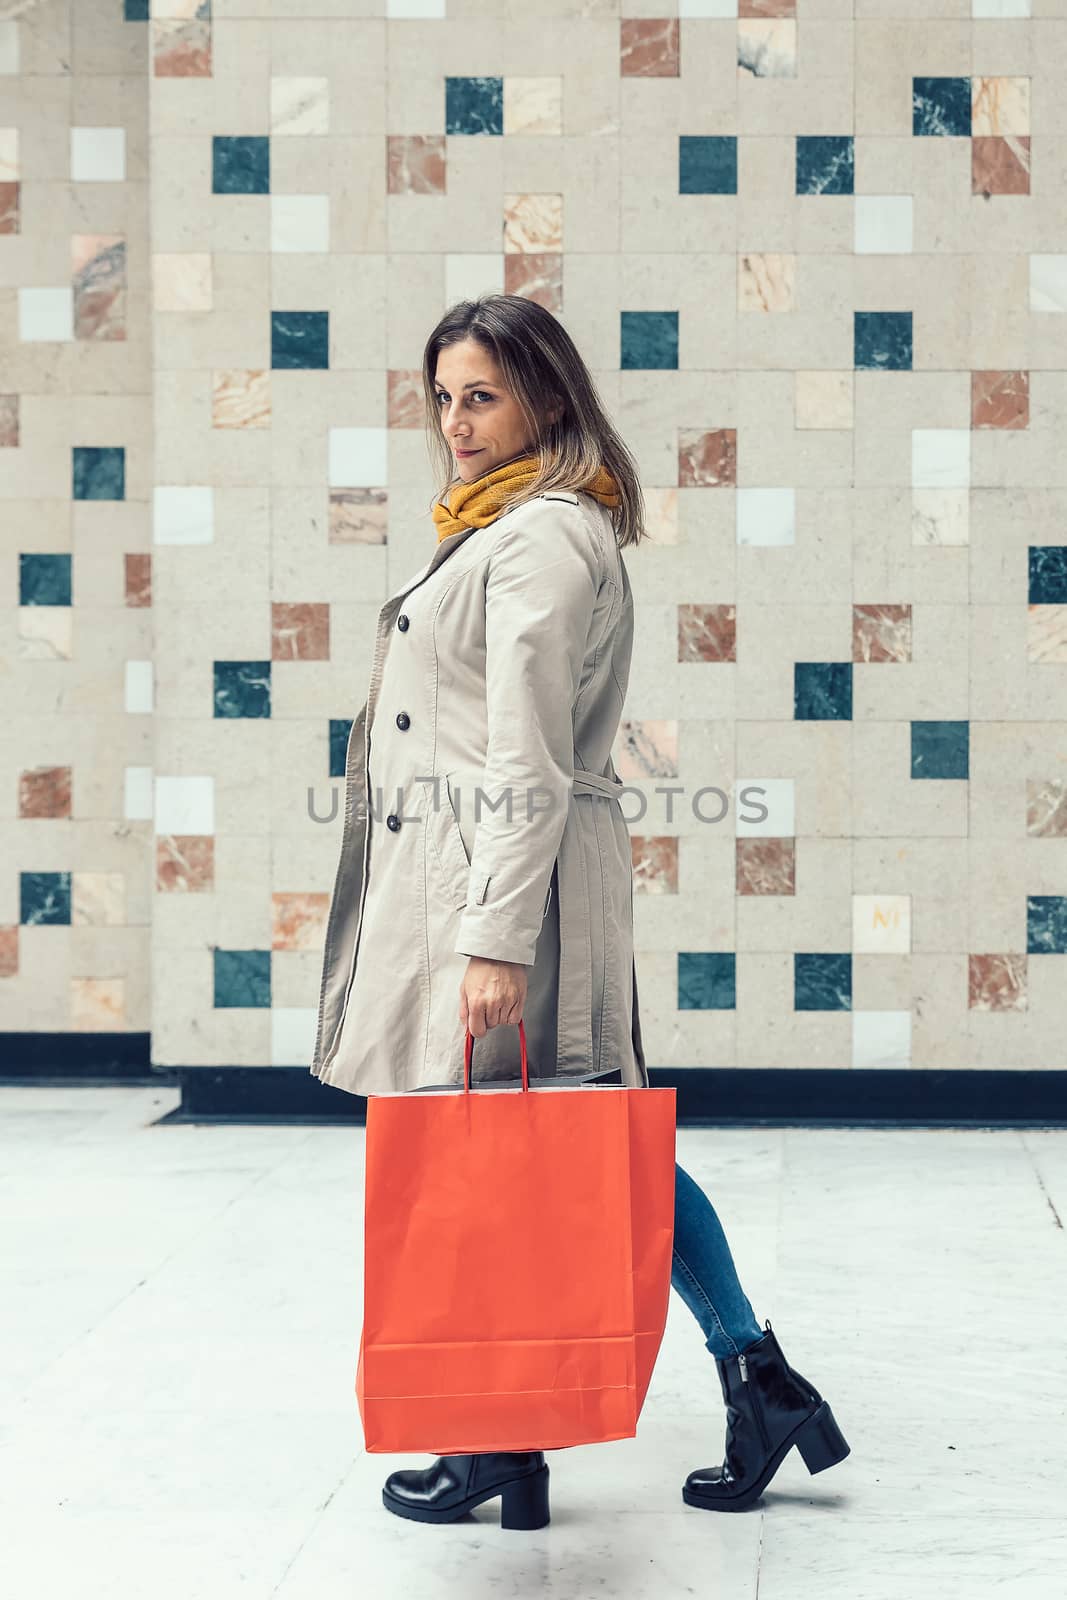 Adult caucasian woman walking alone through a mall with colorful shopping bags.